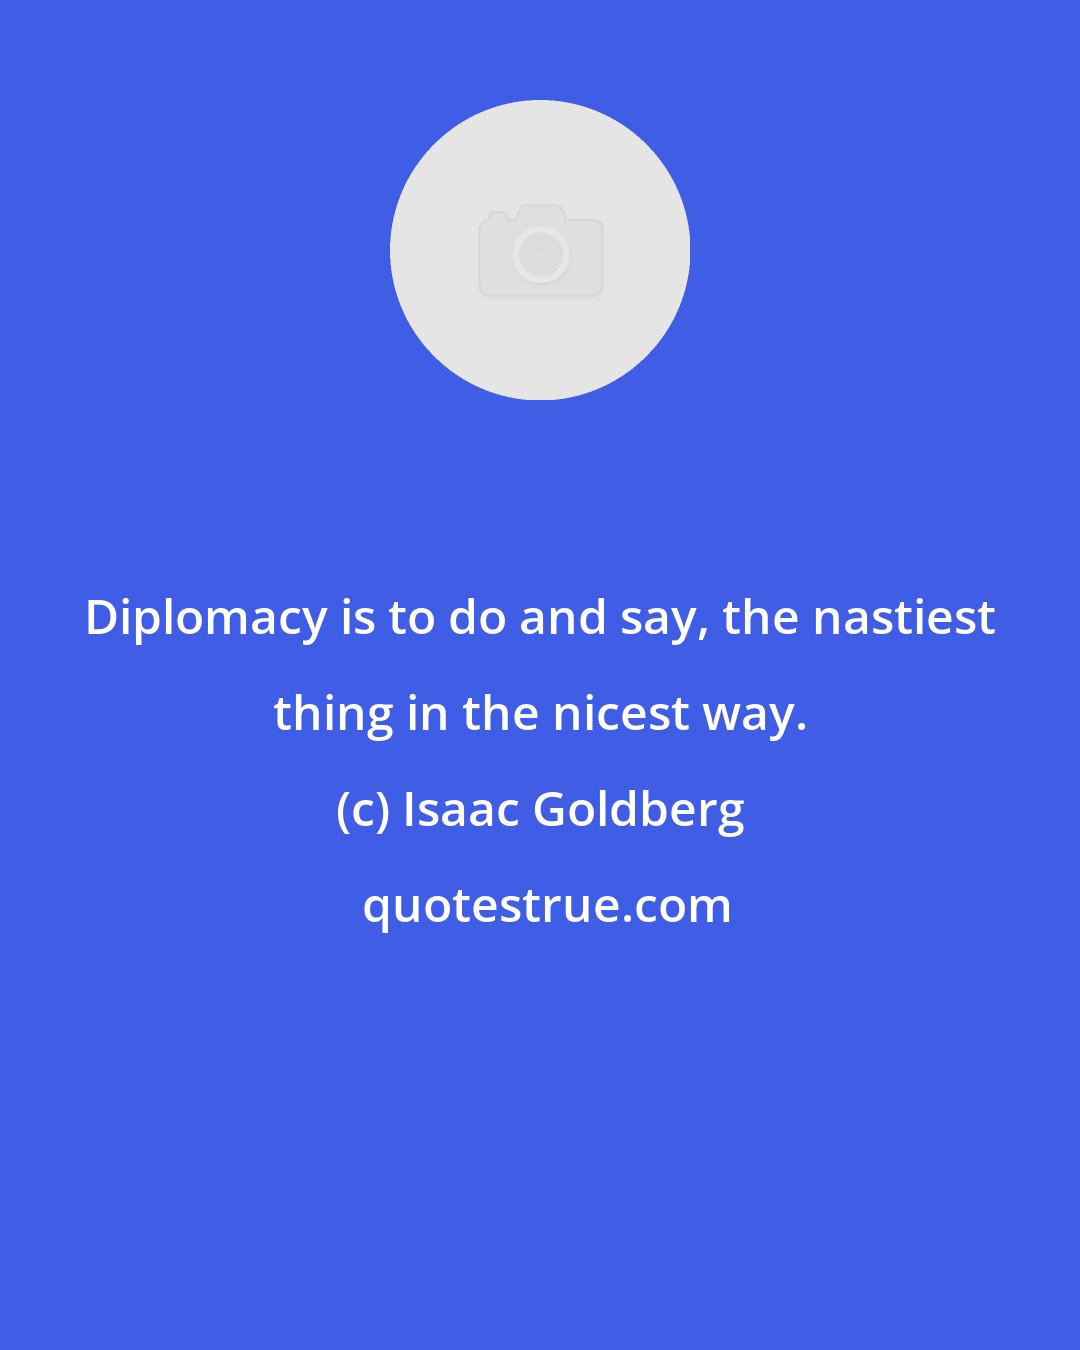 Isaac Goldberg: Diplomacy is to do and say, the nastiest thing in the nicest way.